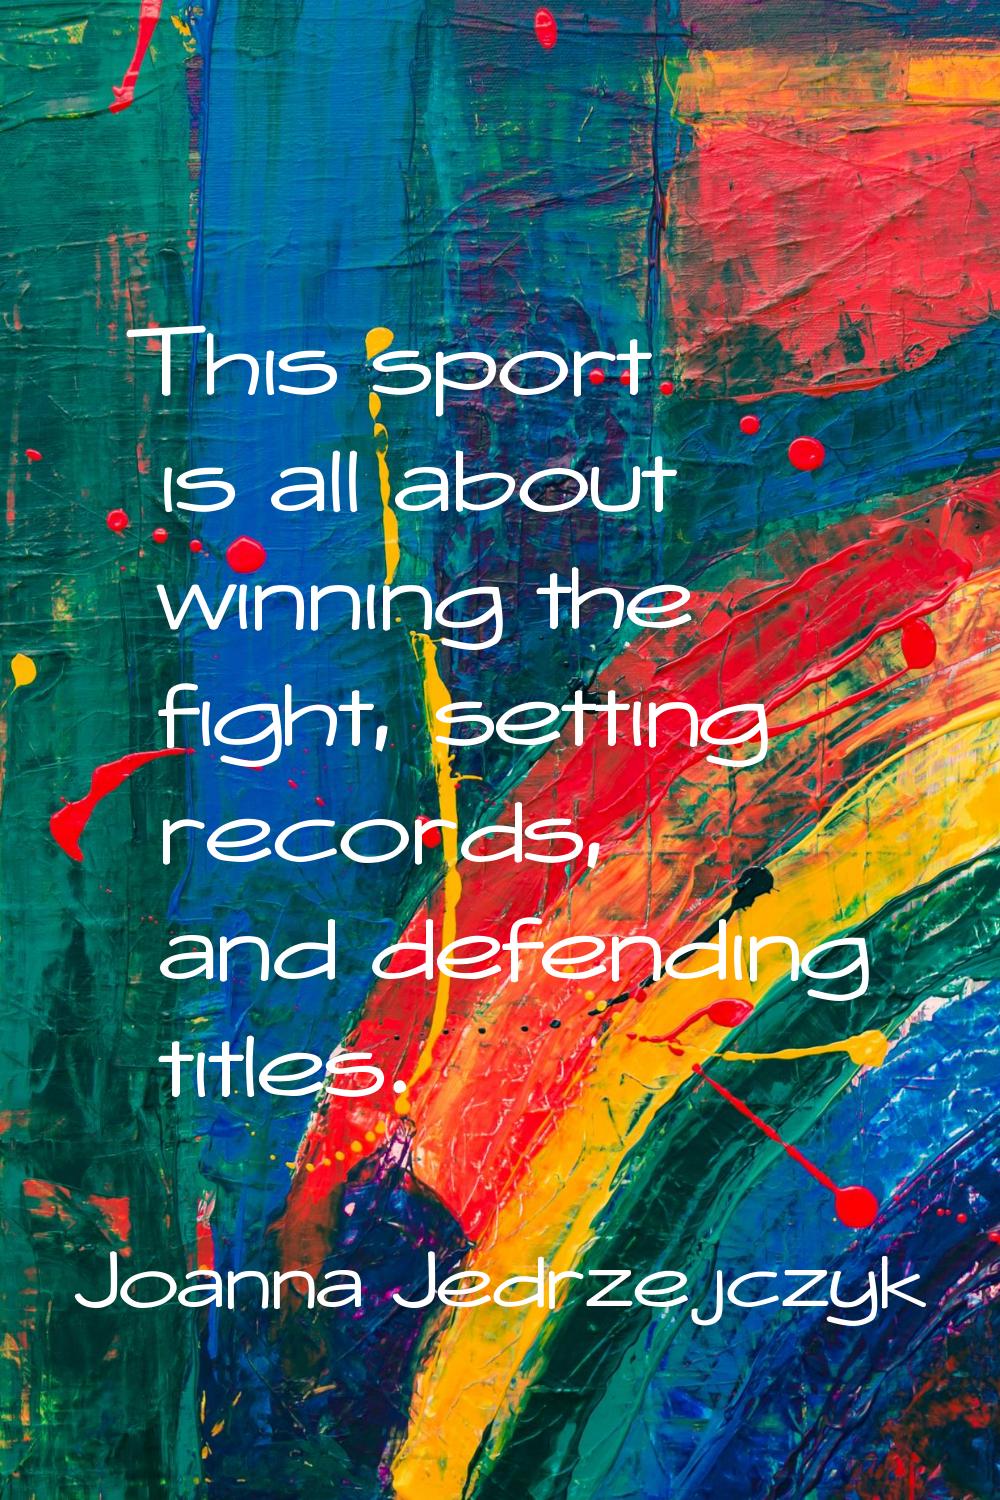 This sport is all about winning the fight, setting records, and defending titles.